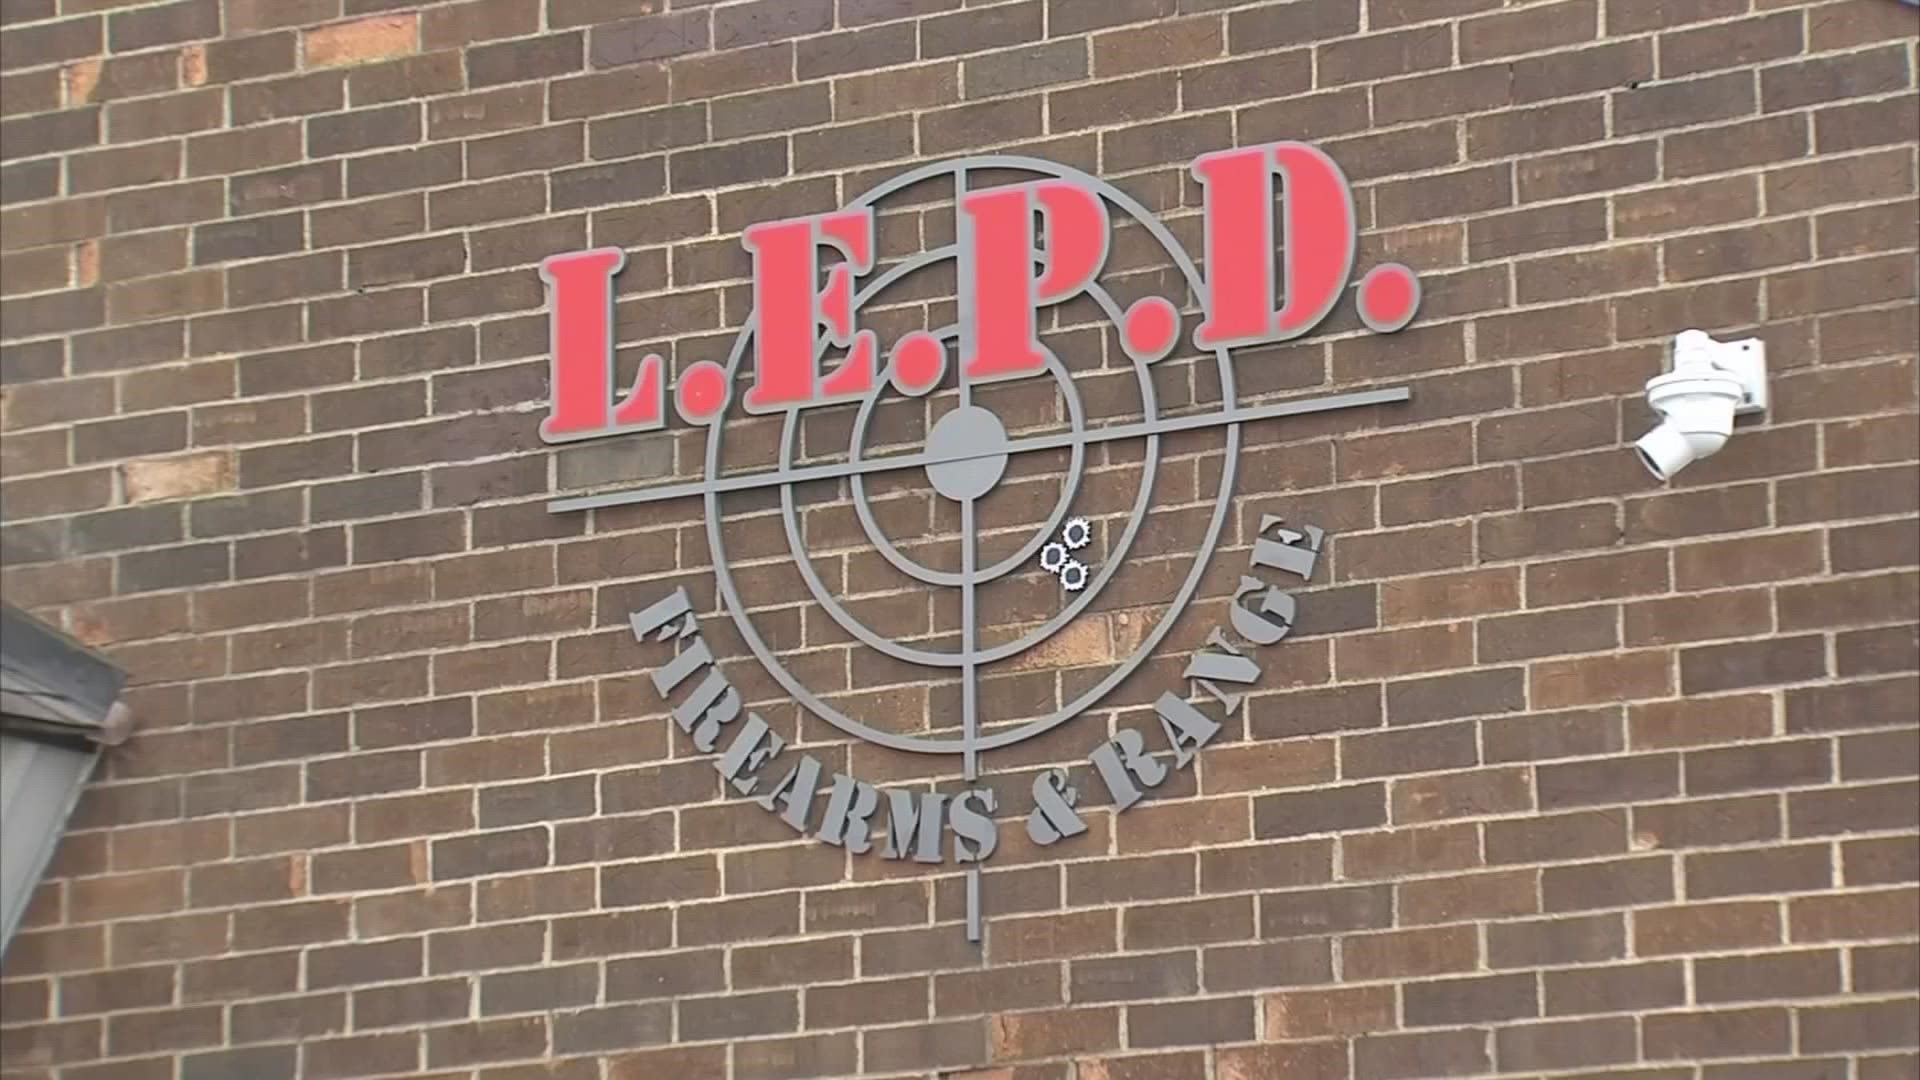 At L.E.P.D. Firearms Range & Training Facility, they've seen an increase in sales, but it's not for the reason they typically see.